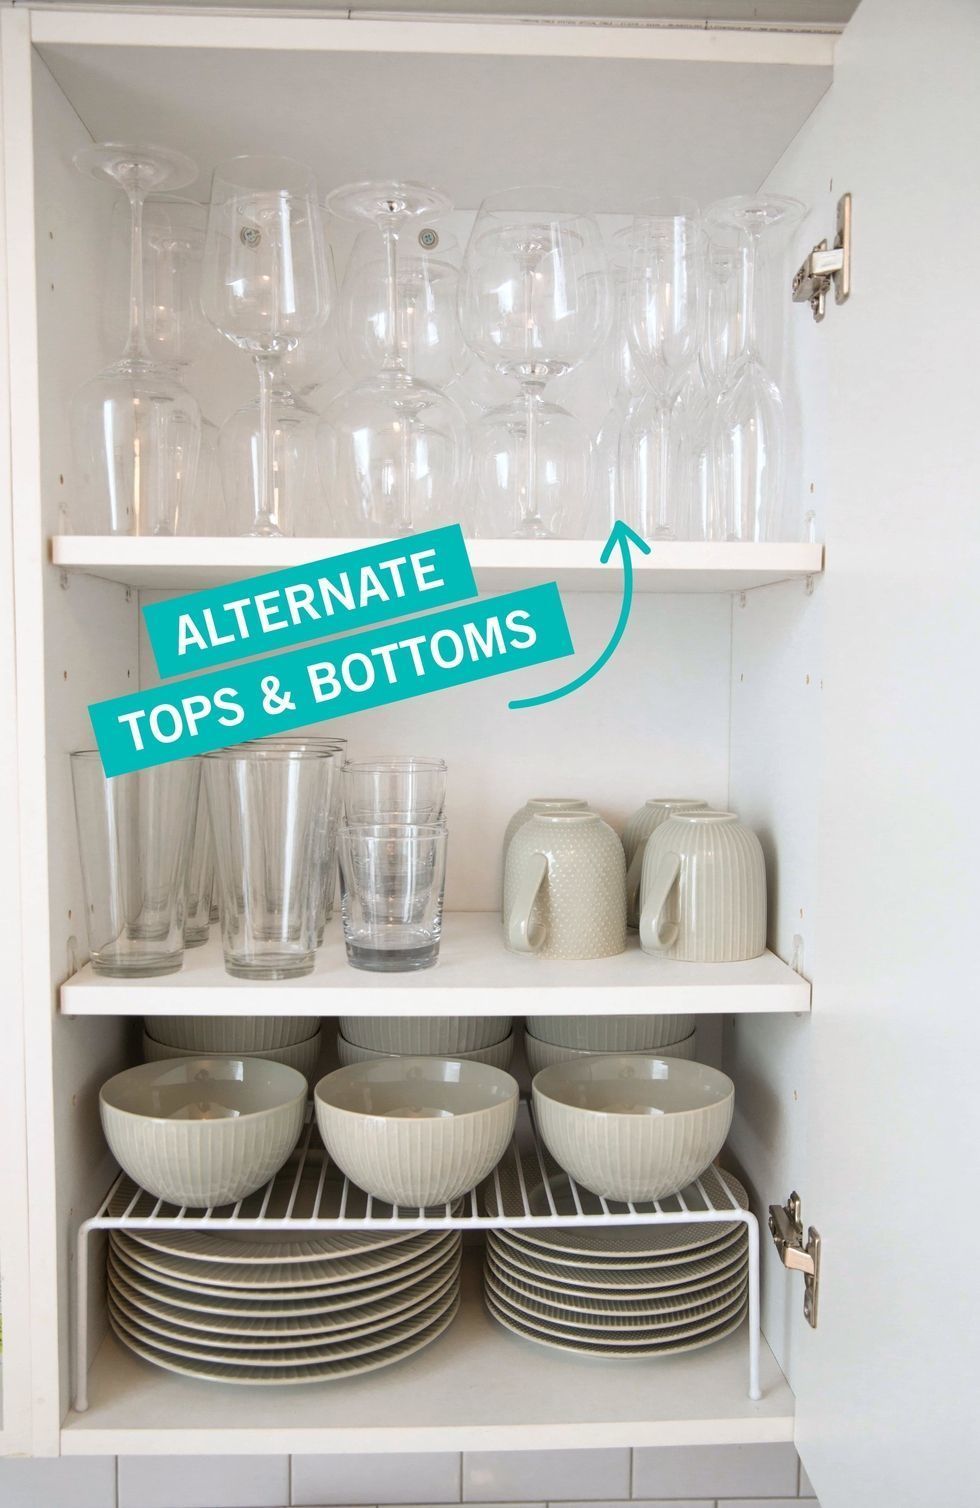 Genius Home Tips We Learned This Year - Best Home Hacks of 2017